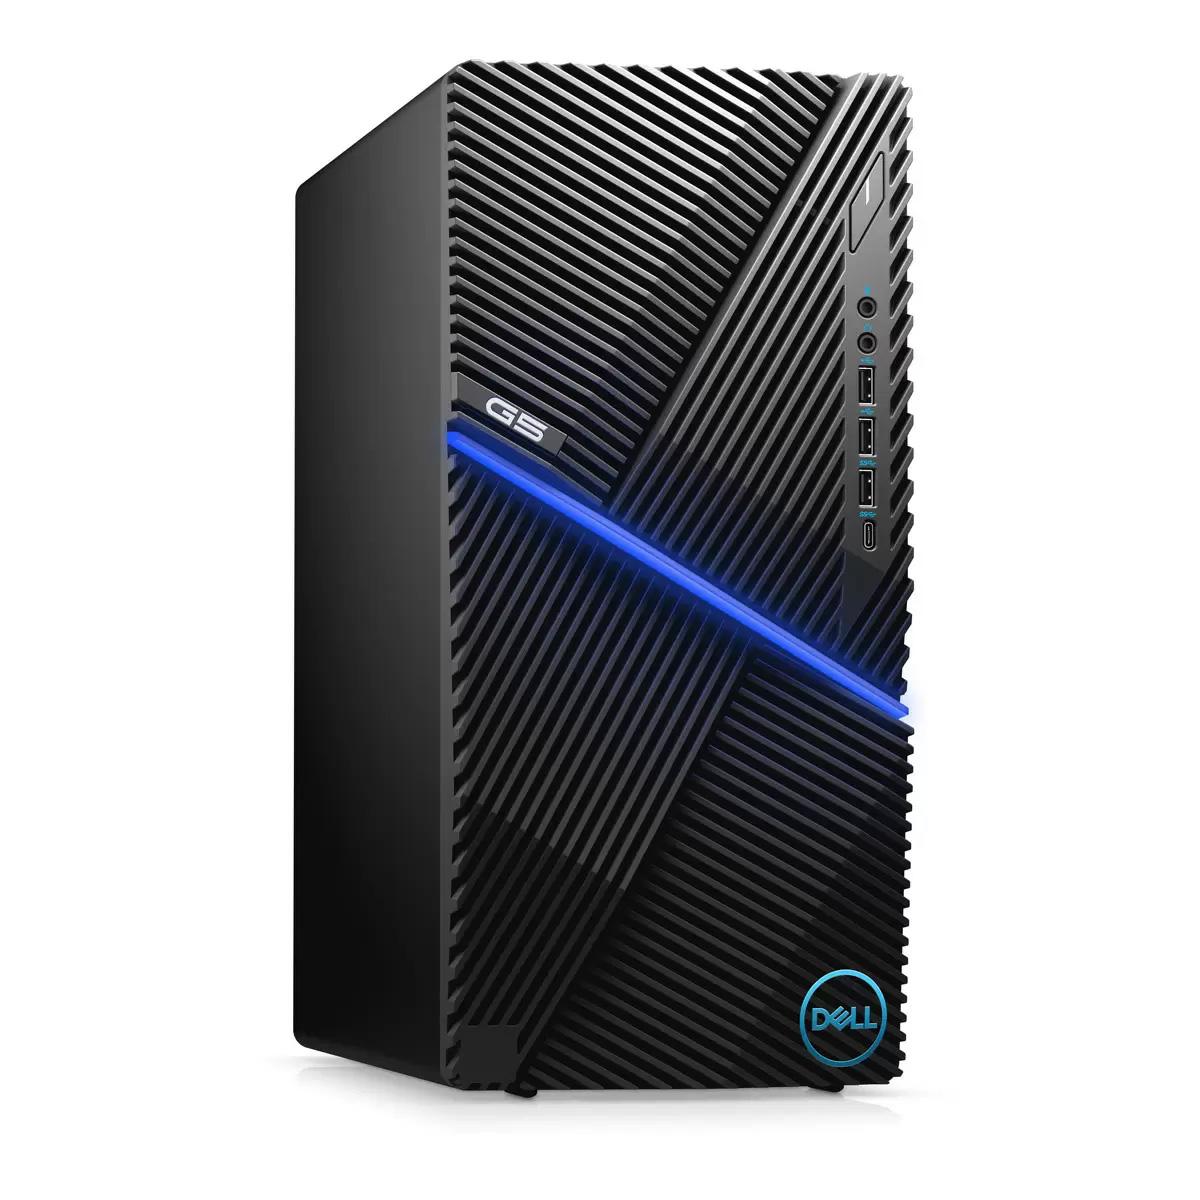 Dell G5 i5 8GB 256GB Gaming Desktop Computer for $529.99 Shipped